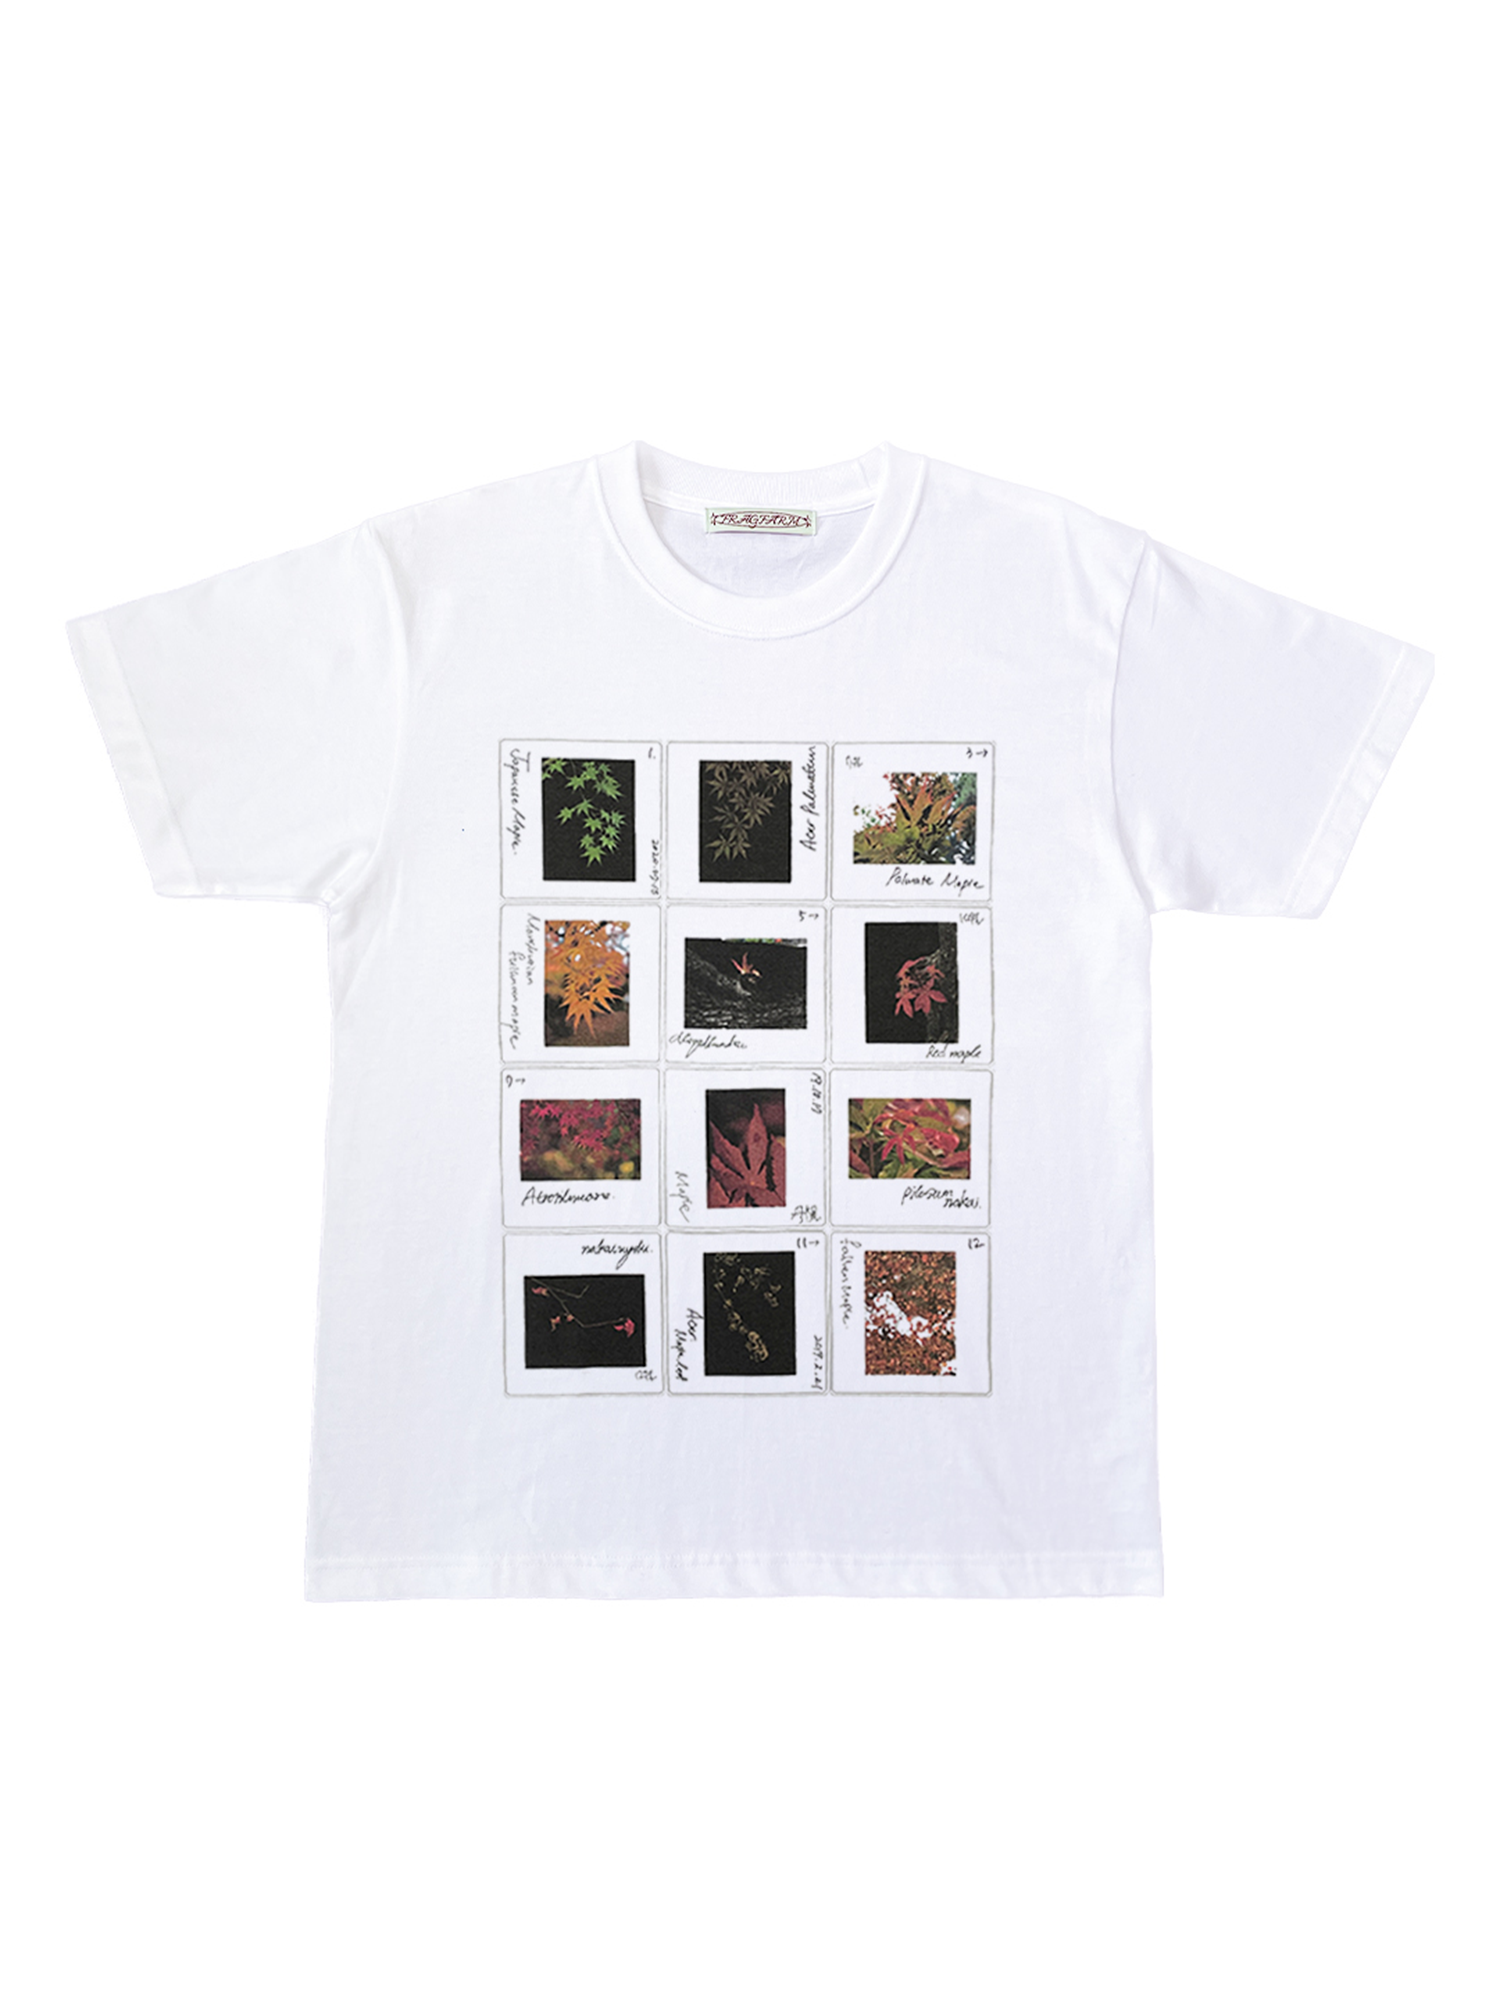 The Record of Autumn Leaves Tee